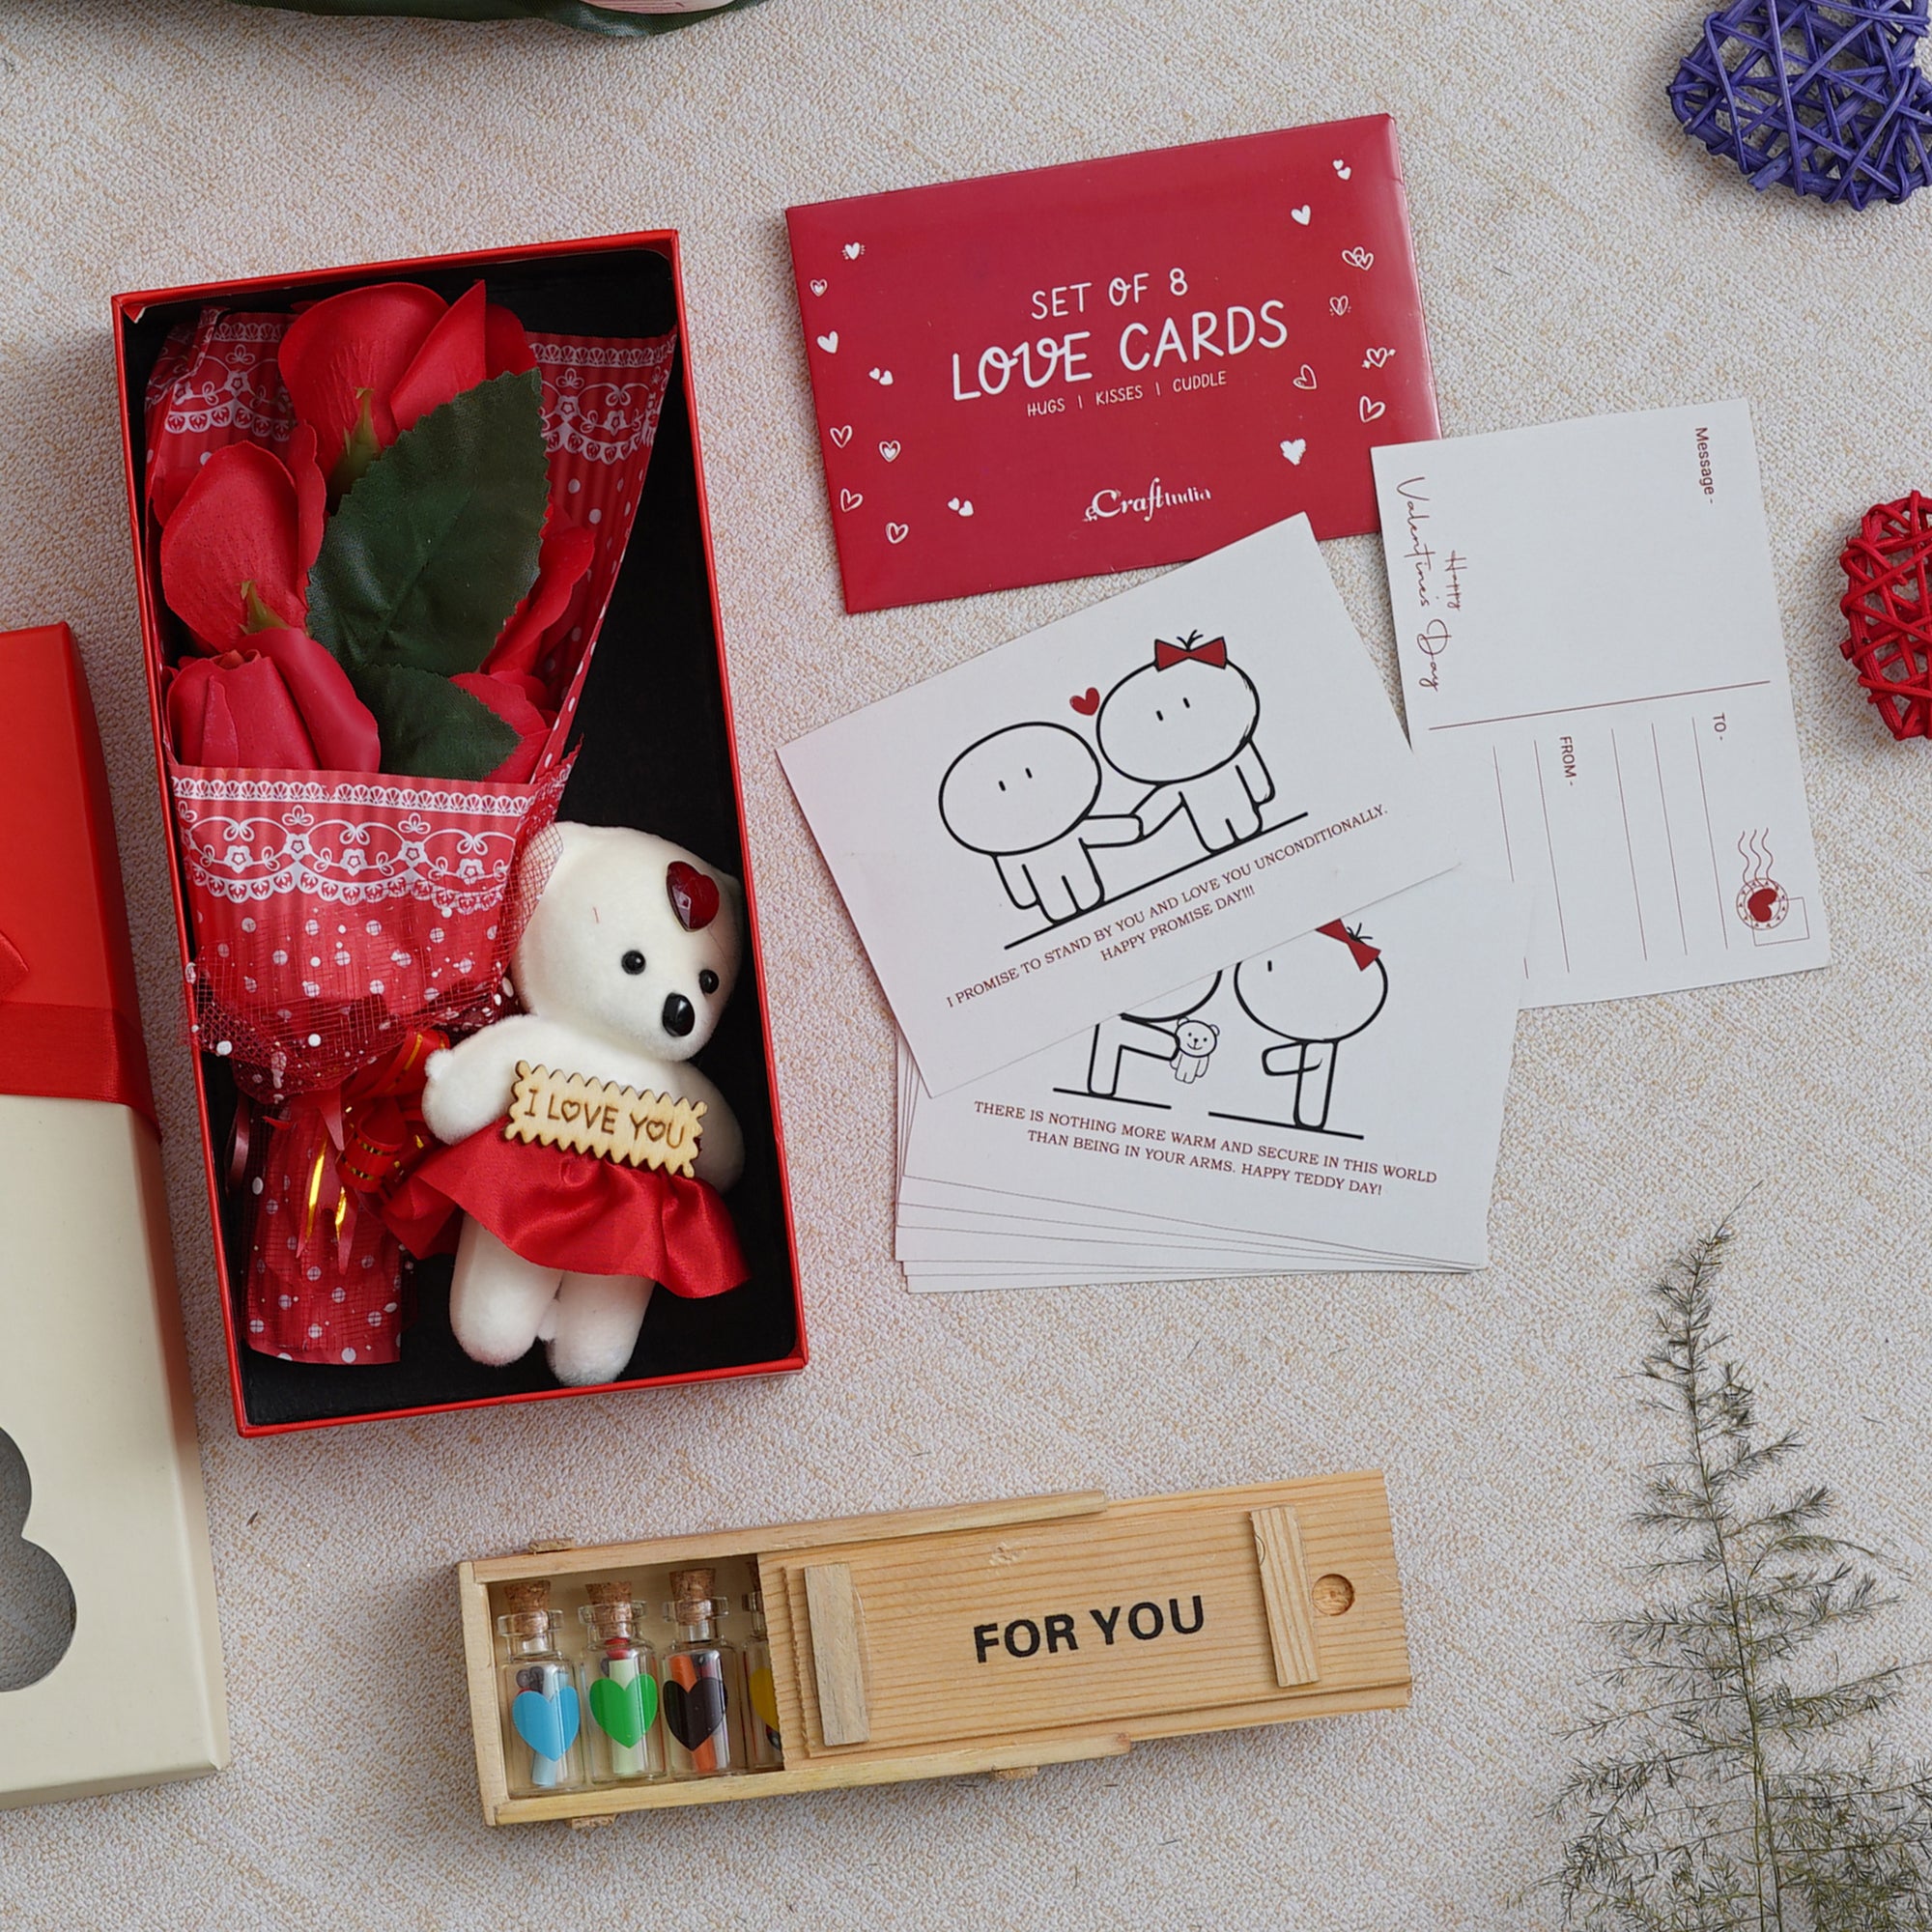 Valentine Combo of Pack of 8 Love Gift Cards, Red Roses Bouquet and White, Red Teddy Bear Valentine's Rectangle Shaped Gift Box, Wooden Box "For You" Message Bottle Set